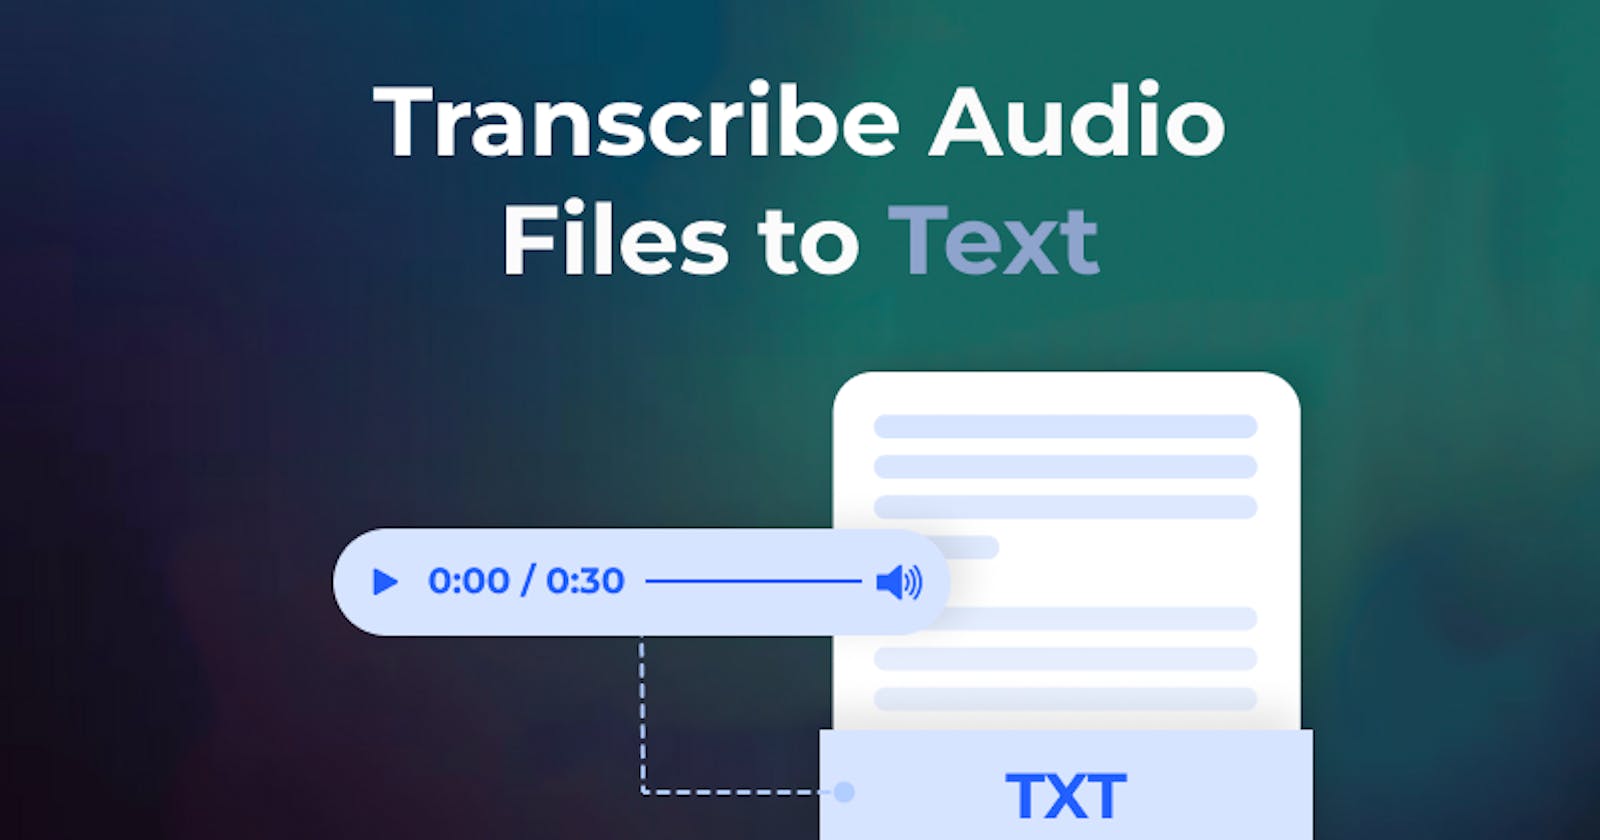 How to transcribe audio files to text